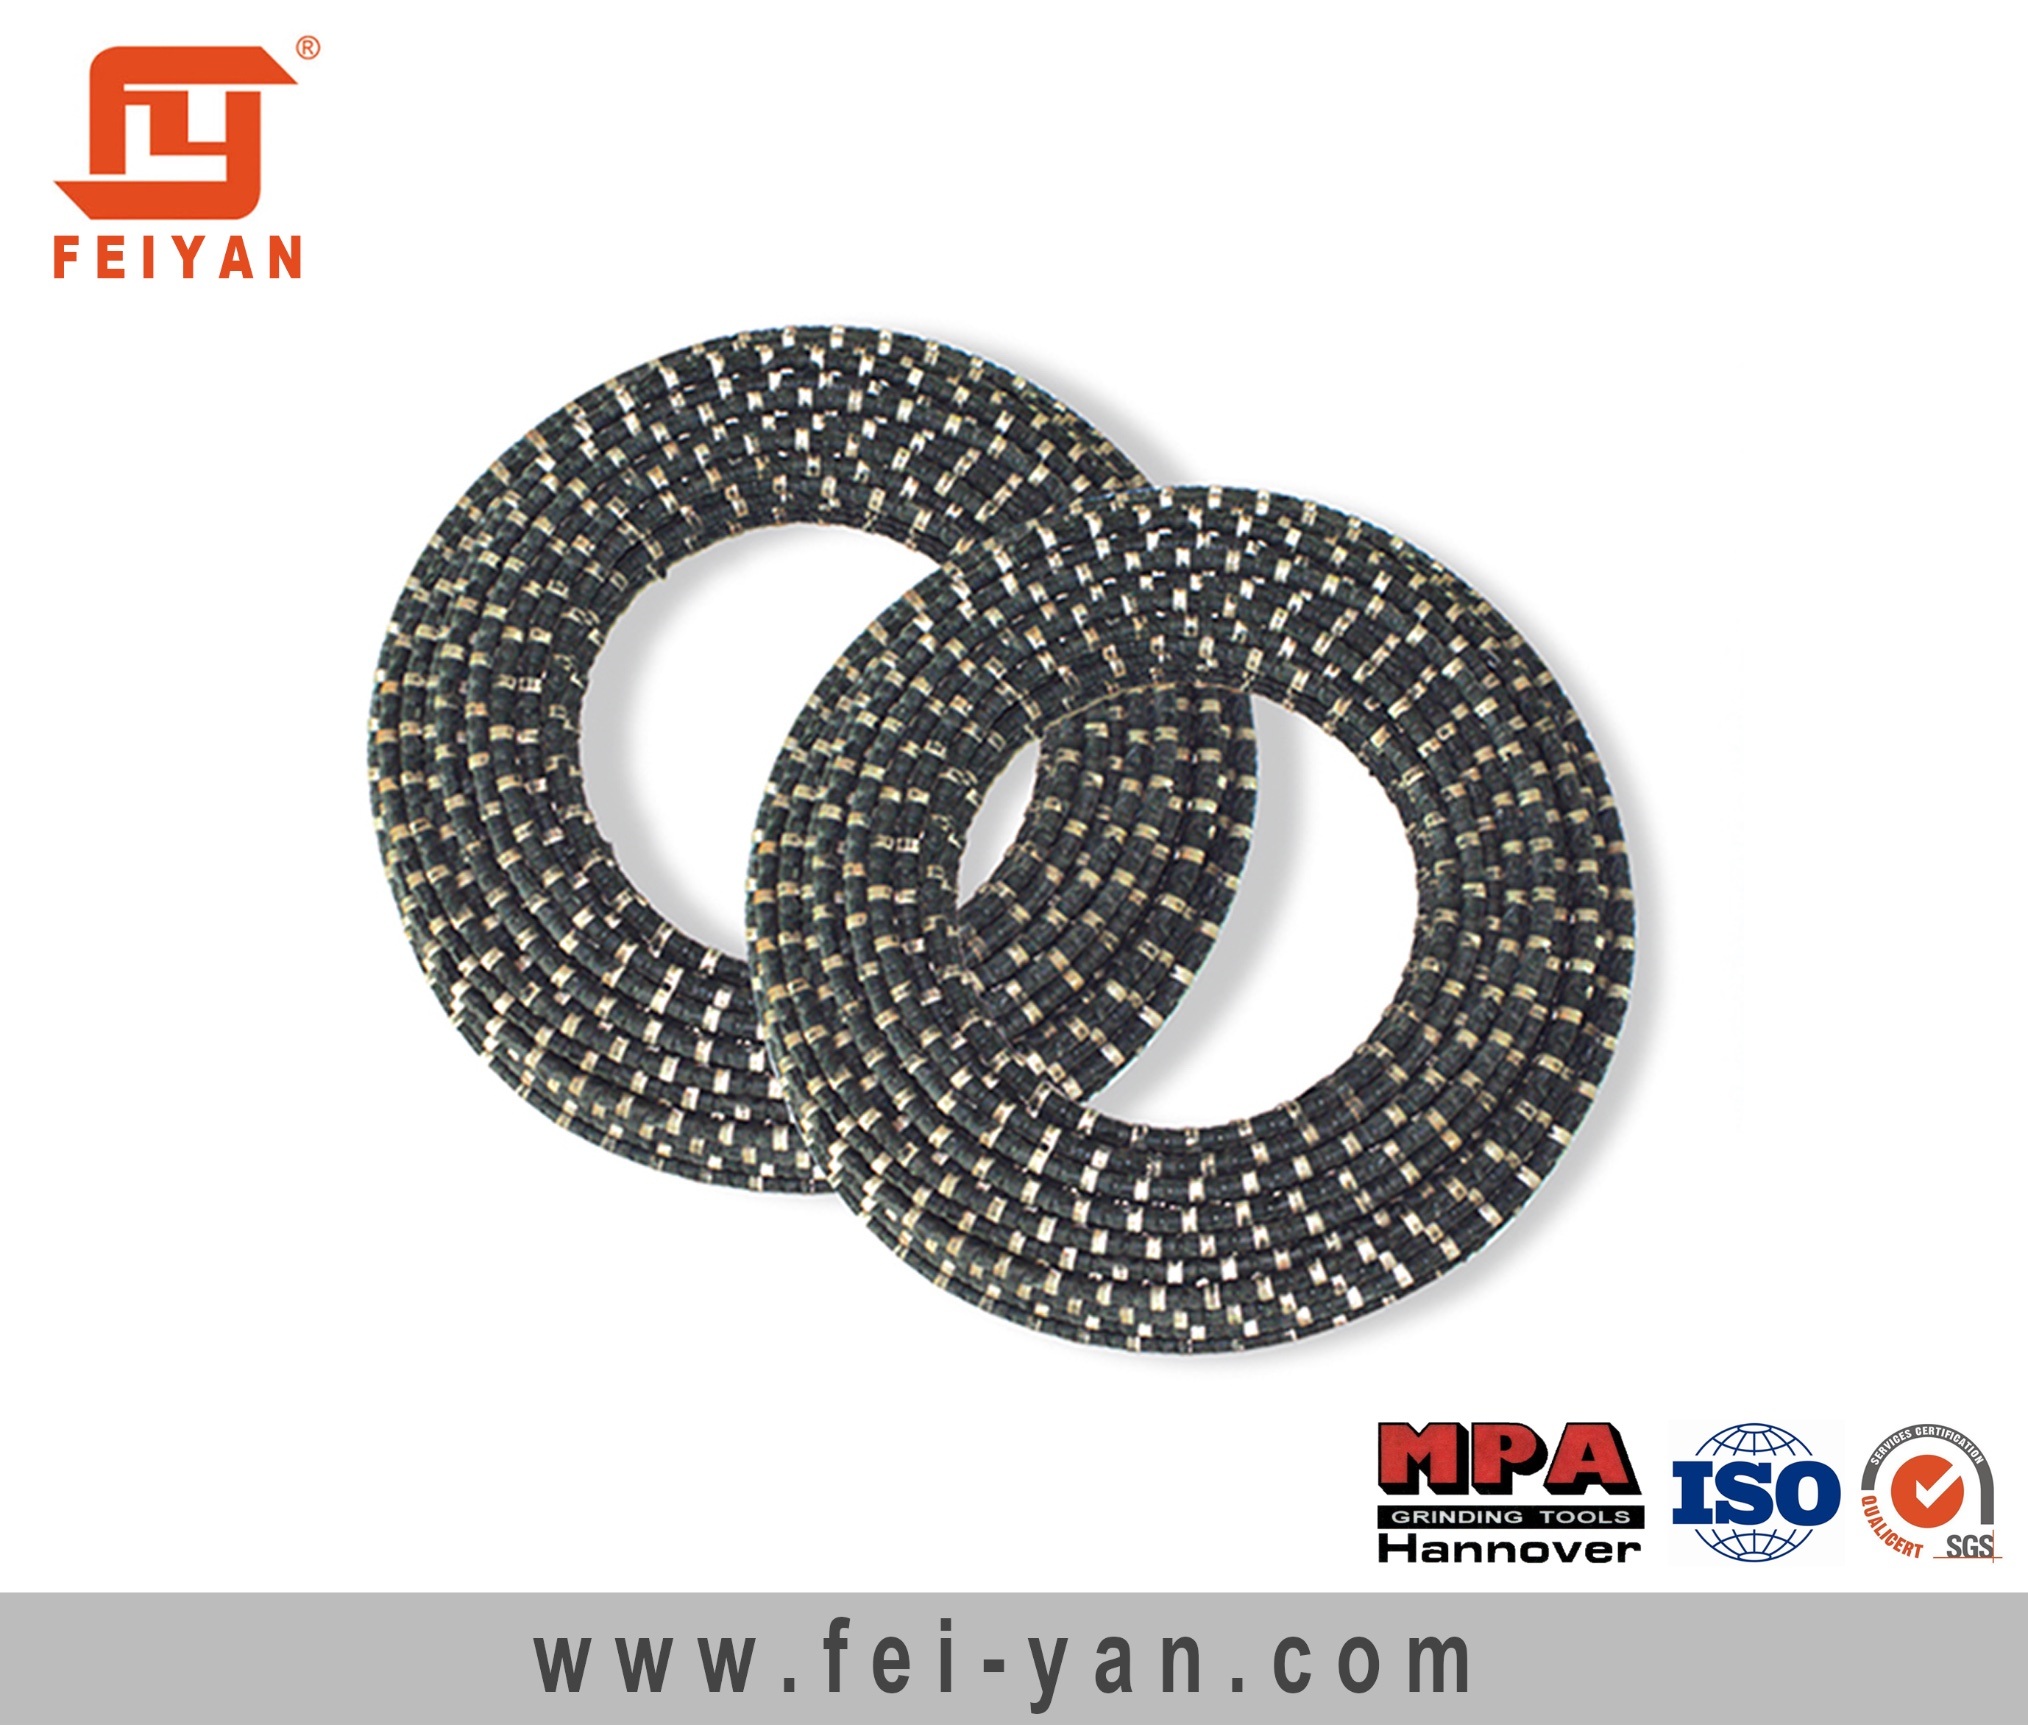 Professional Manufacturer, Factory Price of Diamond Wire for Stone